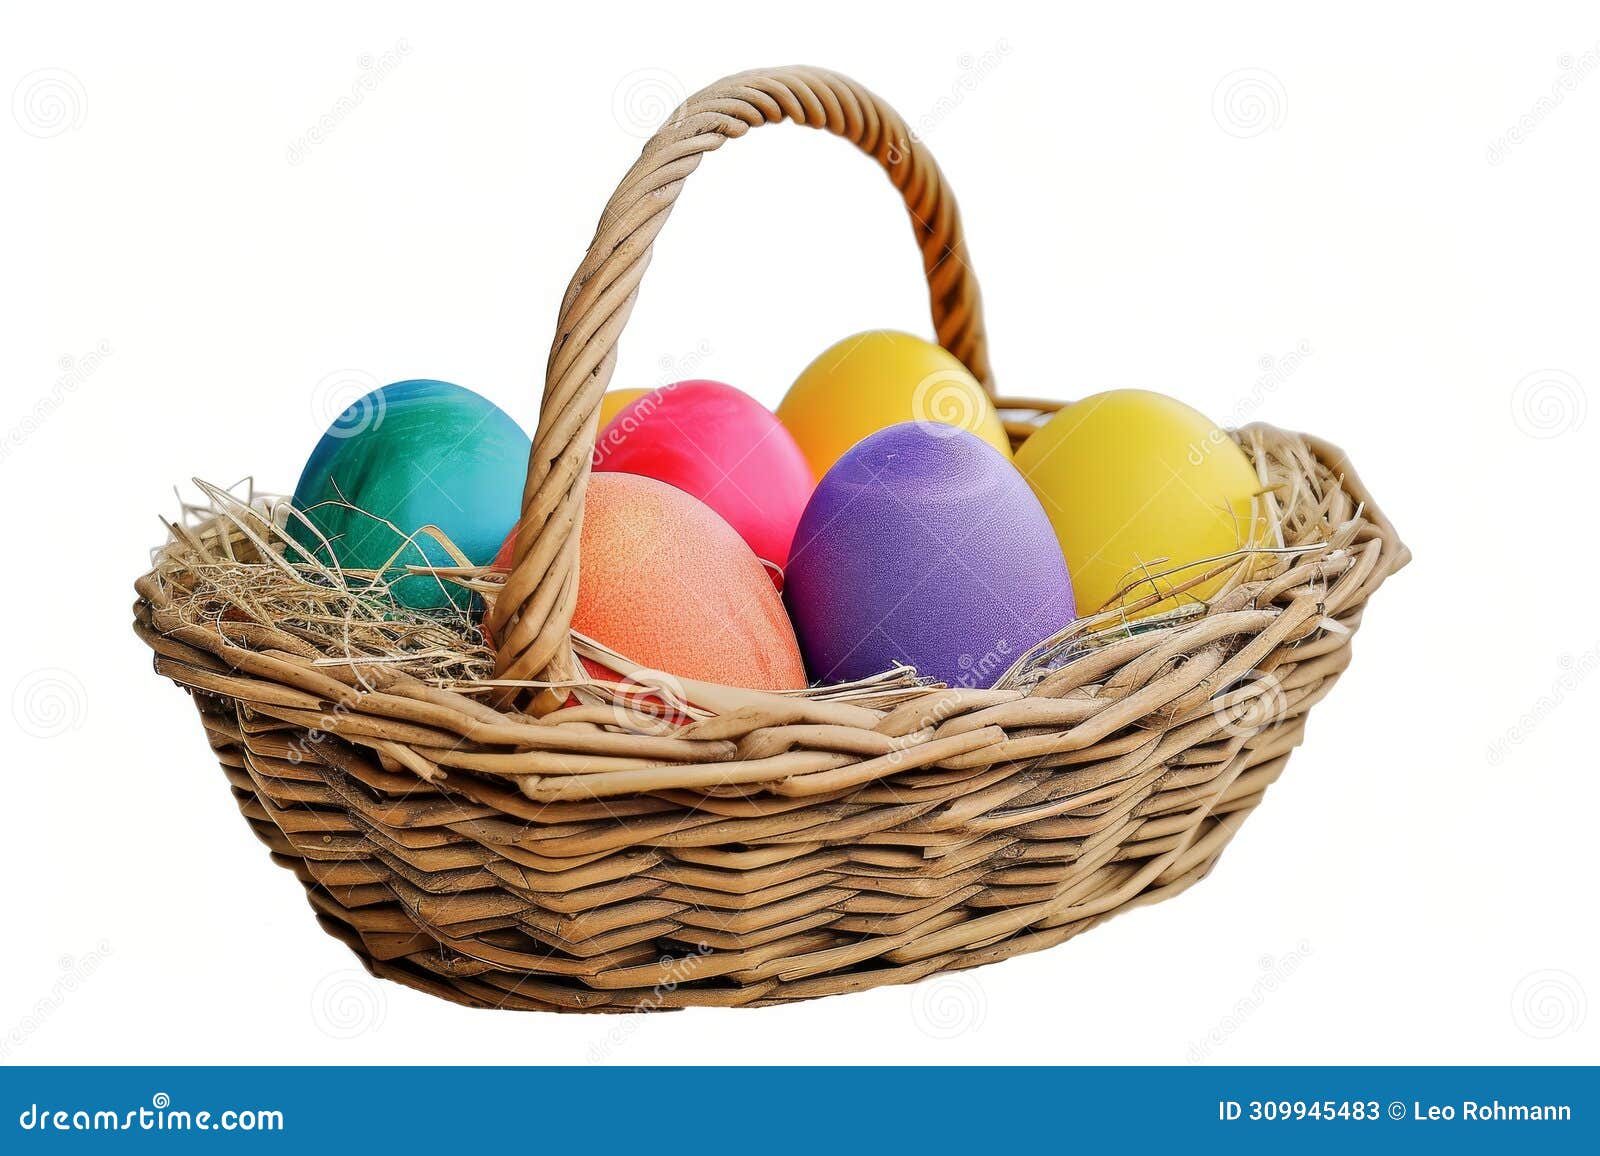 happy easter moral eggs parade basket. white colorful s bunny bouquet. cream background wallpaper